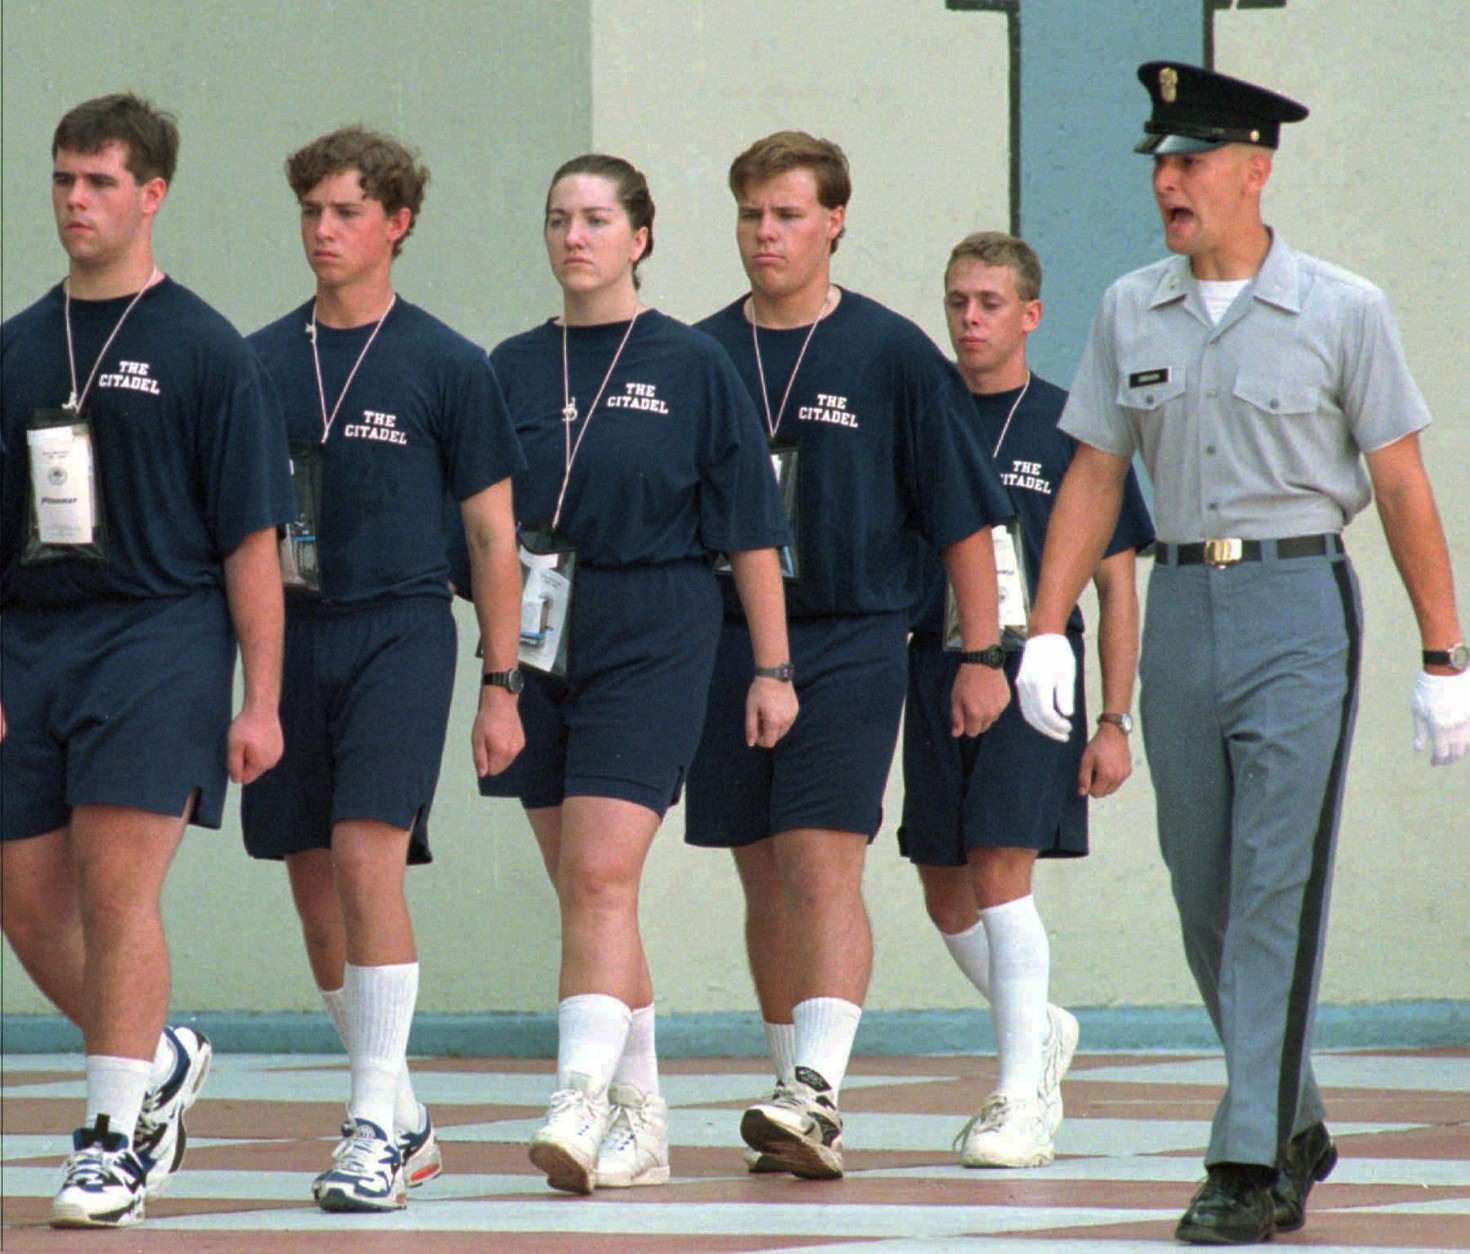 On this date in 1995, Shannon Faulkner officially became the first female cadet in the history of The Citadel, South Carolina's state military college. Here, Faulkner, center, marches with her company on Monday, Aug. 14, 1995. (AP Photo/Wade Spees, Pool)